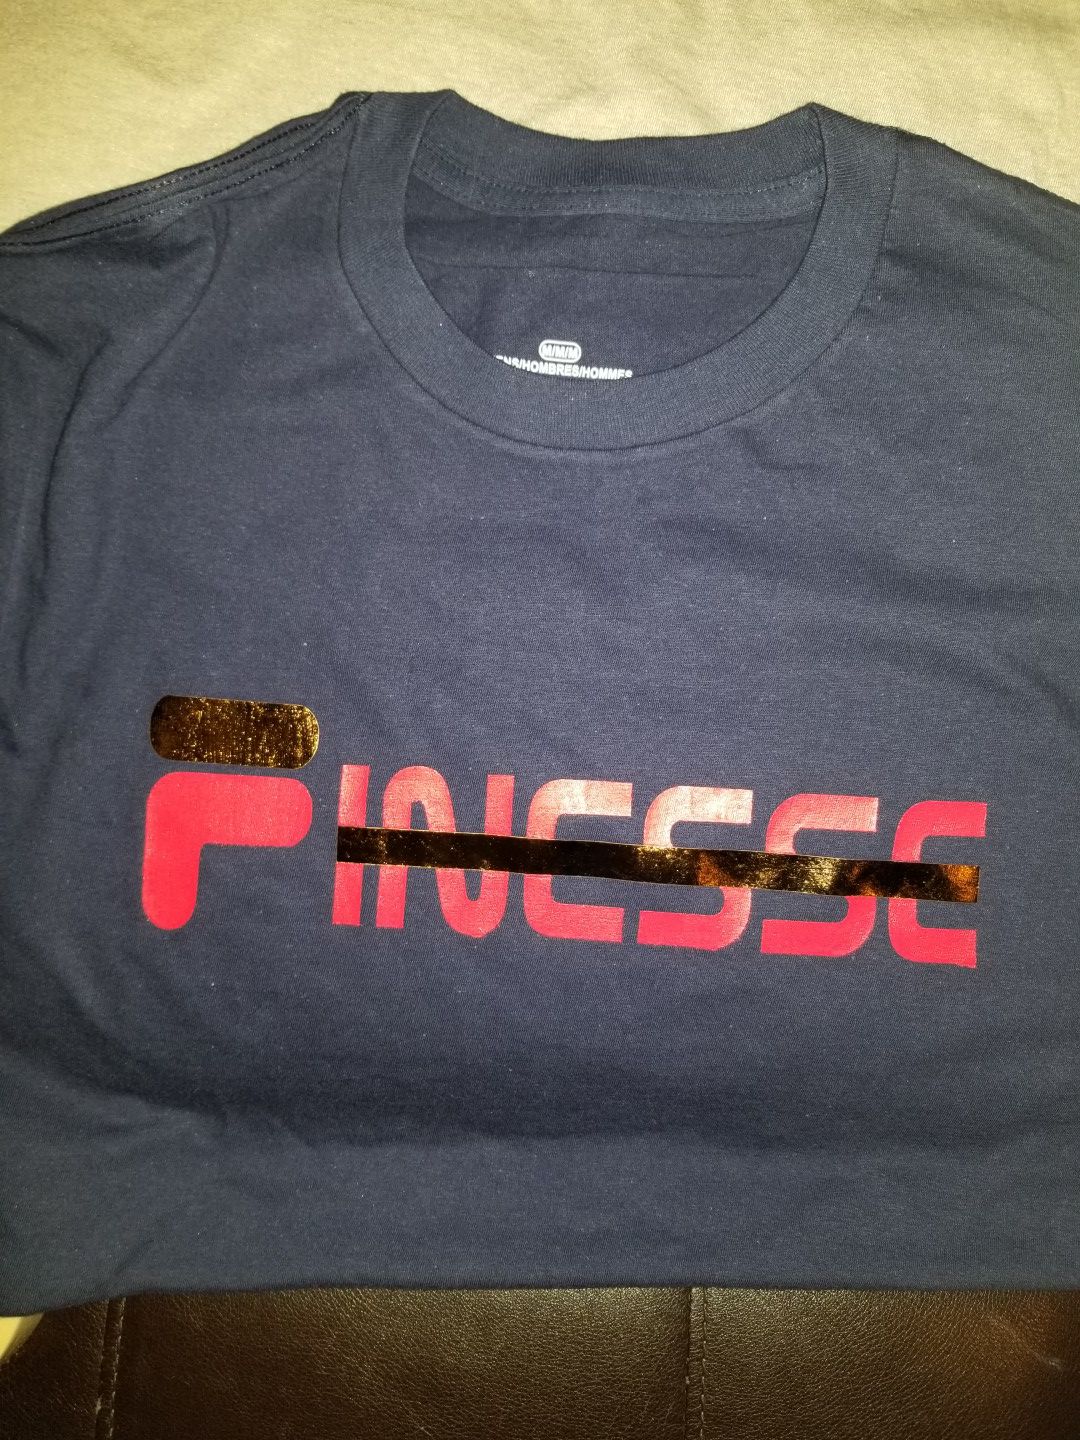 Finesse tshirts from {url removed}